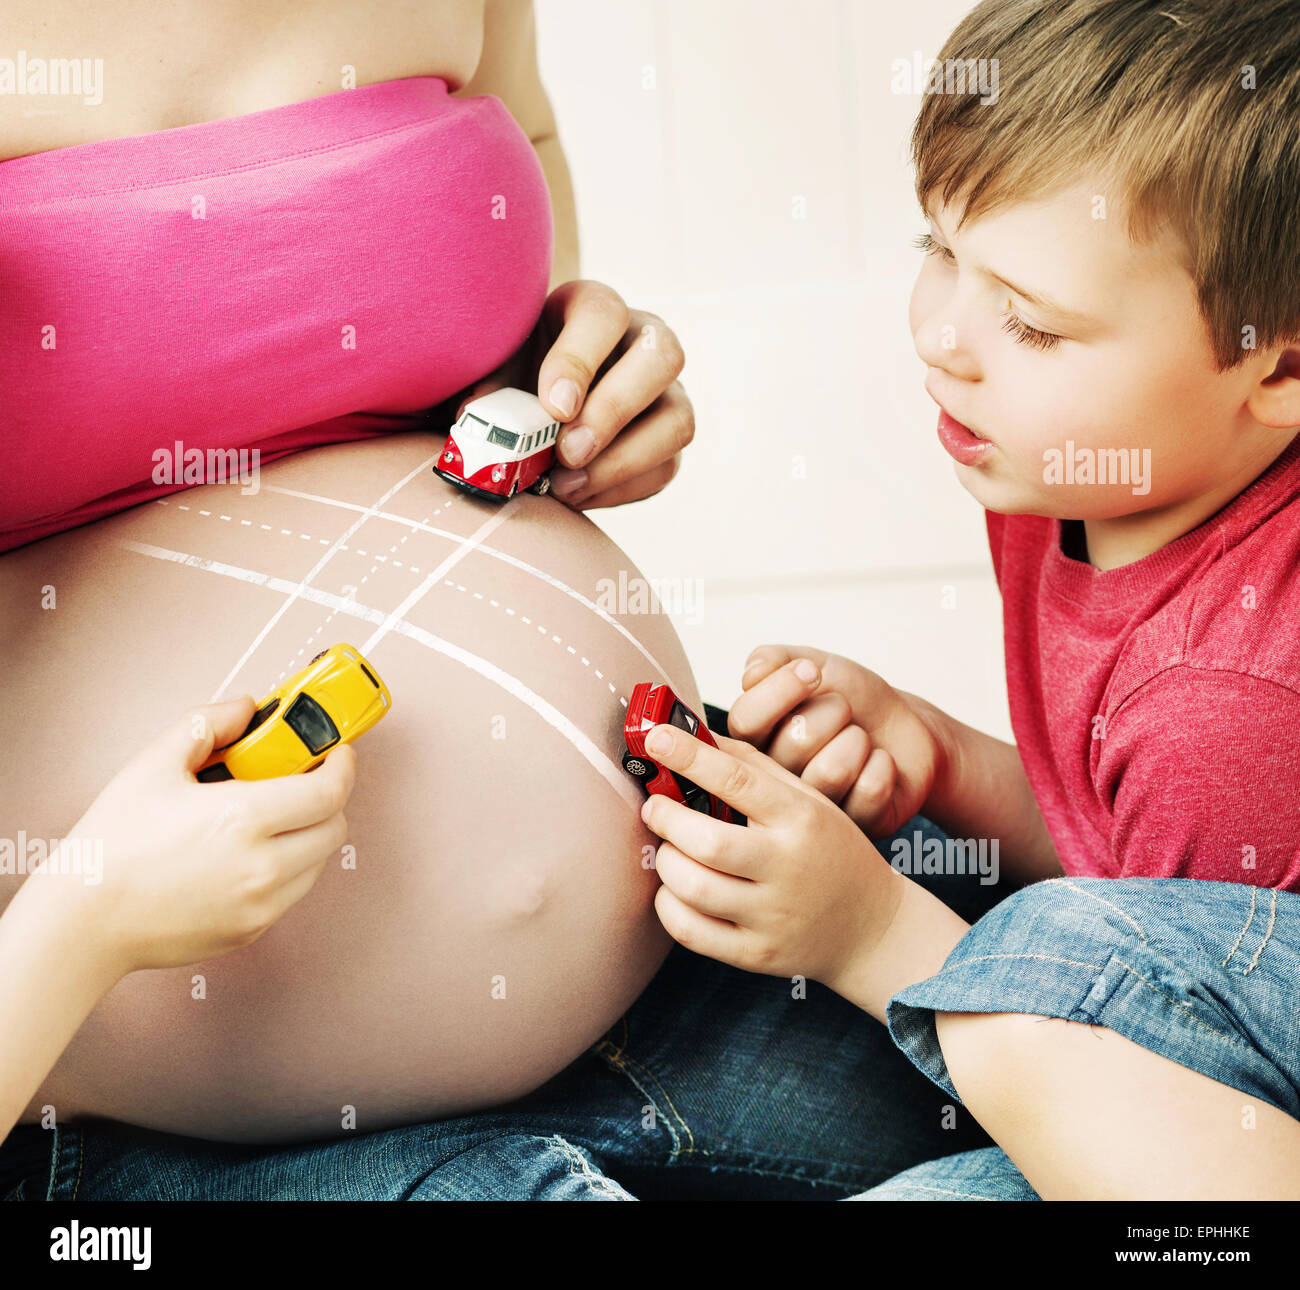 Boys playing with an unborn brother Stock Photo